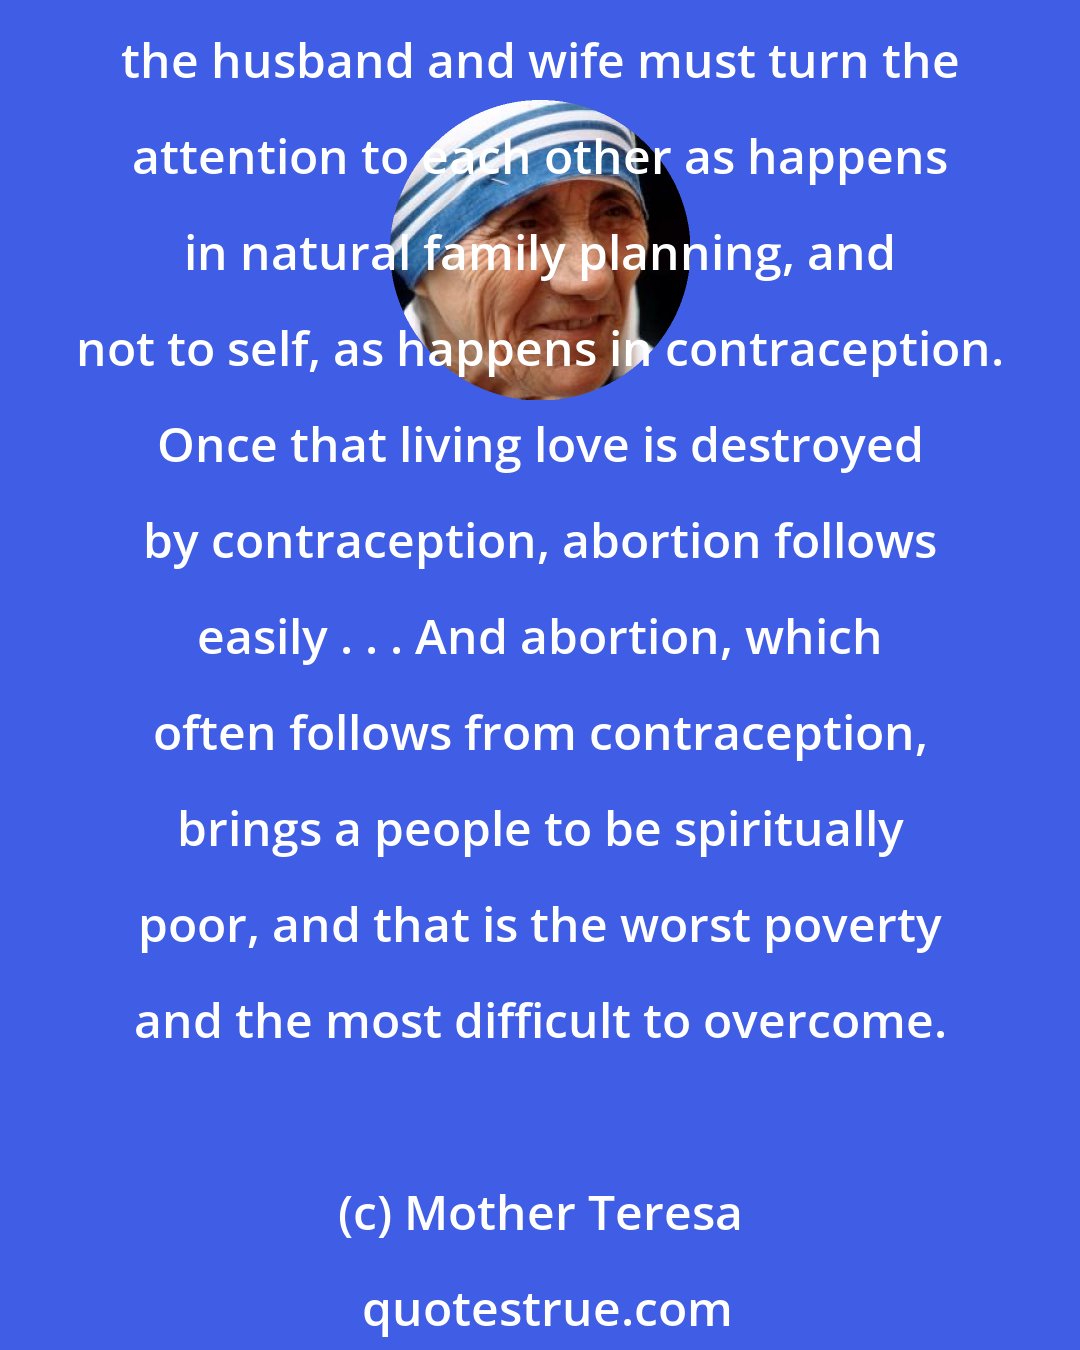 Mother Teresa: The way to plan the family is natural family planning, not contraception...This (use of contraceptives) turns the attention to self and so it destroys the gift of love in him or her. In loving, the husband and wife must turn the attention to each other as happens in natural family planning, and not to self, as happens in contraception. Once that living love is destroyed by contraception, abortion follows easily . . . And abortion, which often follows from contraception, brings a people to be spiritually poor, and that is the worst poverty and the most difficult to overcome.